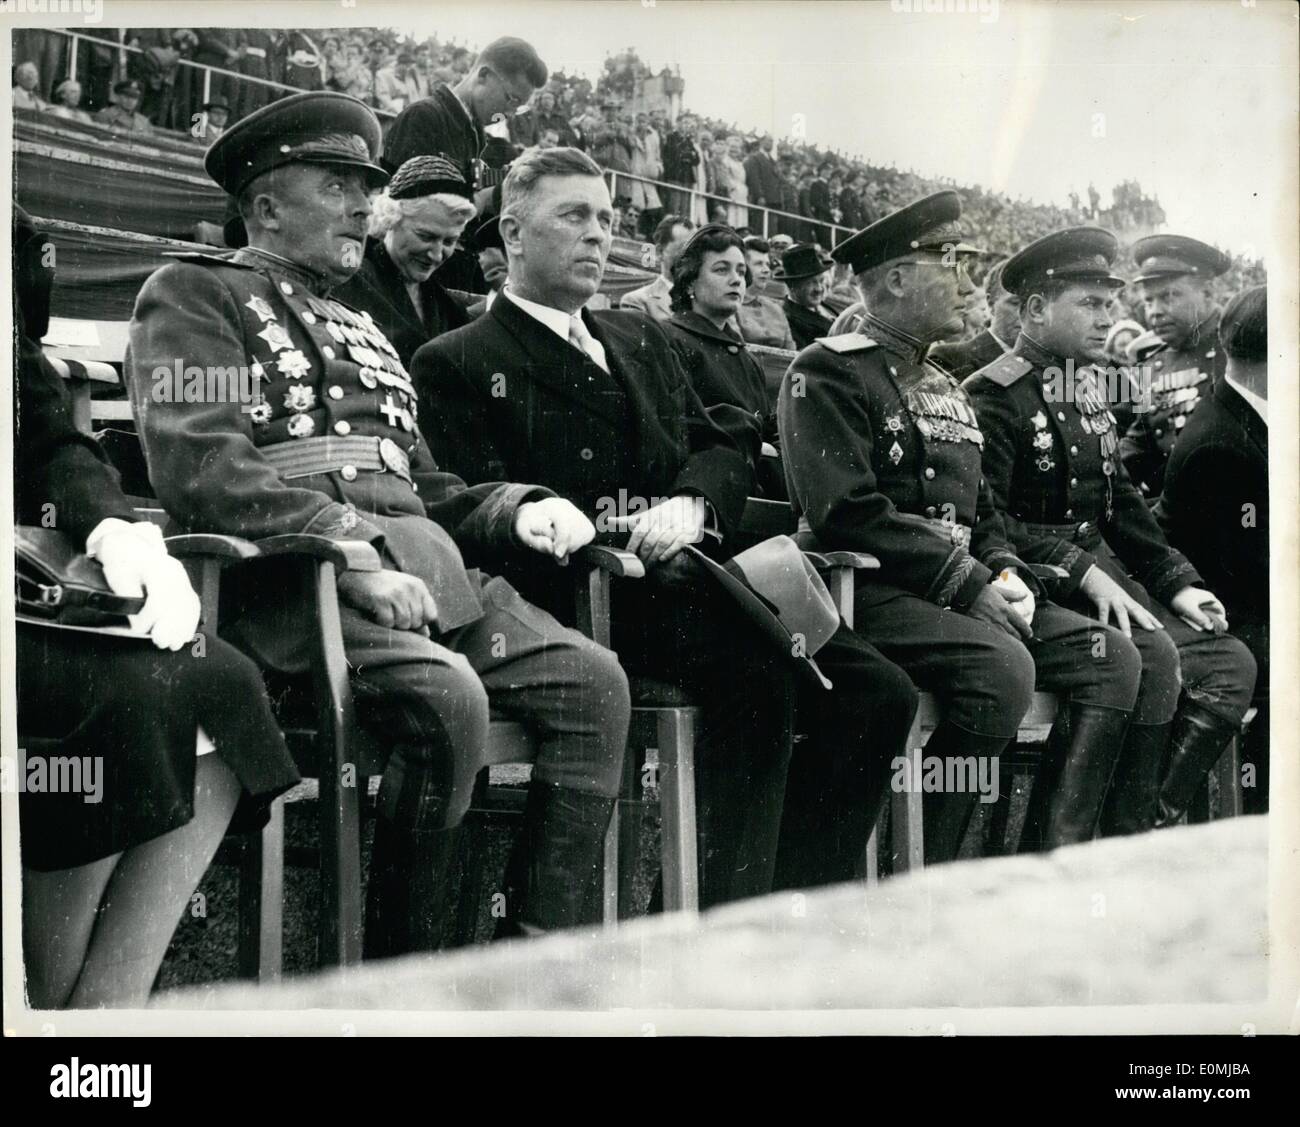 Jun. 06, 1955 - British occupation troops take part in coronation parade in Berlin.: Nearly 60,000 Berliners watched British troops units take part in a coronation day parade at ''Mayfield'', near the Olympic stadium, Berlin on June 2nd. Photo shows among the spectators watching the parade were General Dgi (civilian) leader of the Soviet control Commission in Berlin and his his representative Trusso, seen in uniform. Stock Photo